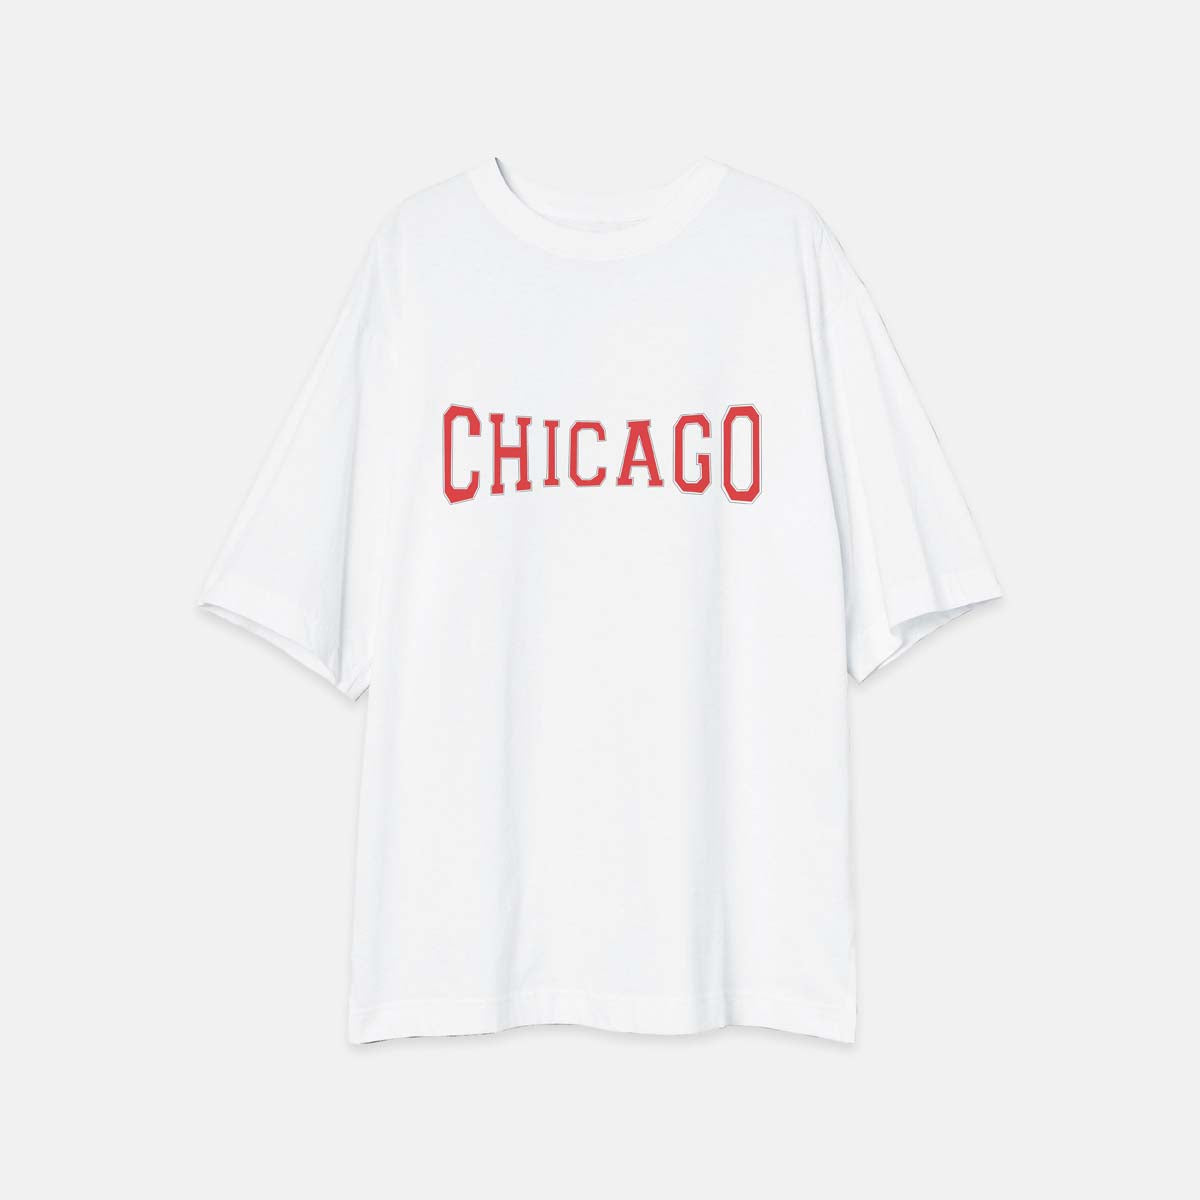 Chicago - Printed Oversized Tees